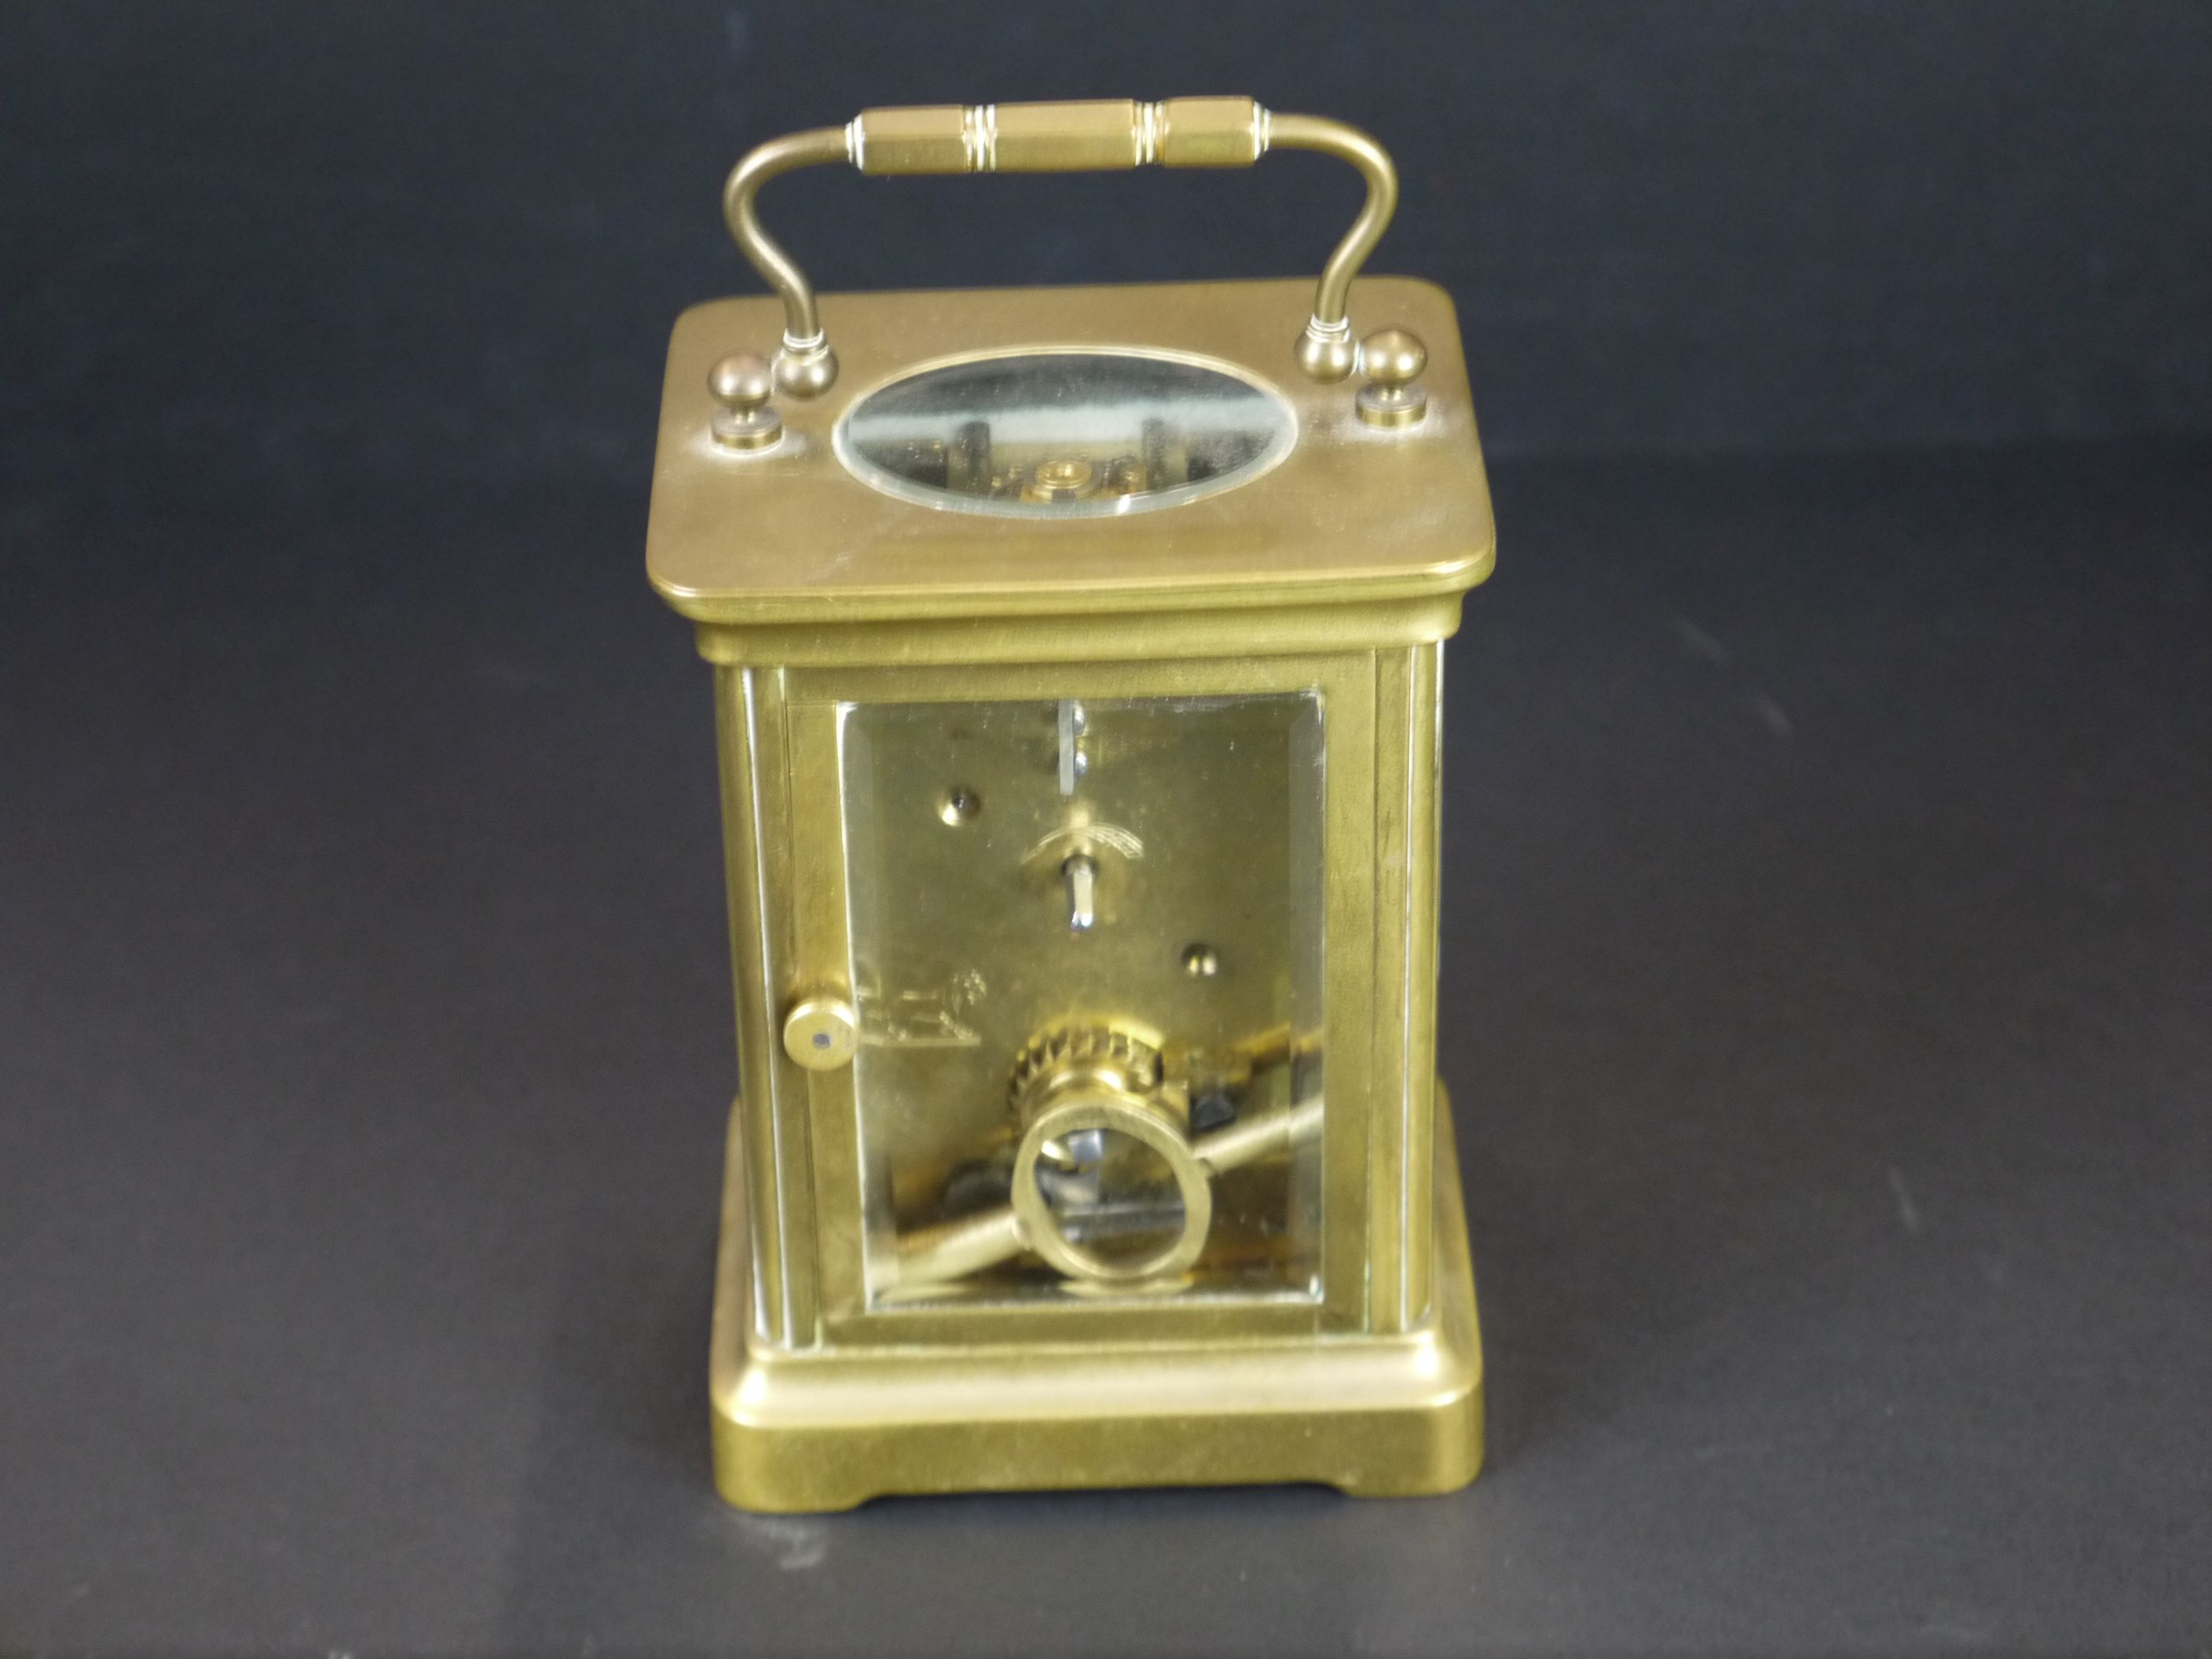 An early 20th century brass cased carriage clock with bevelled glass panels and white enamel dial. - Image 3 of 4